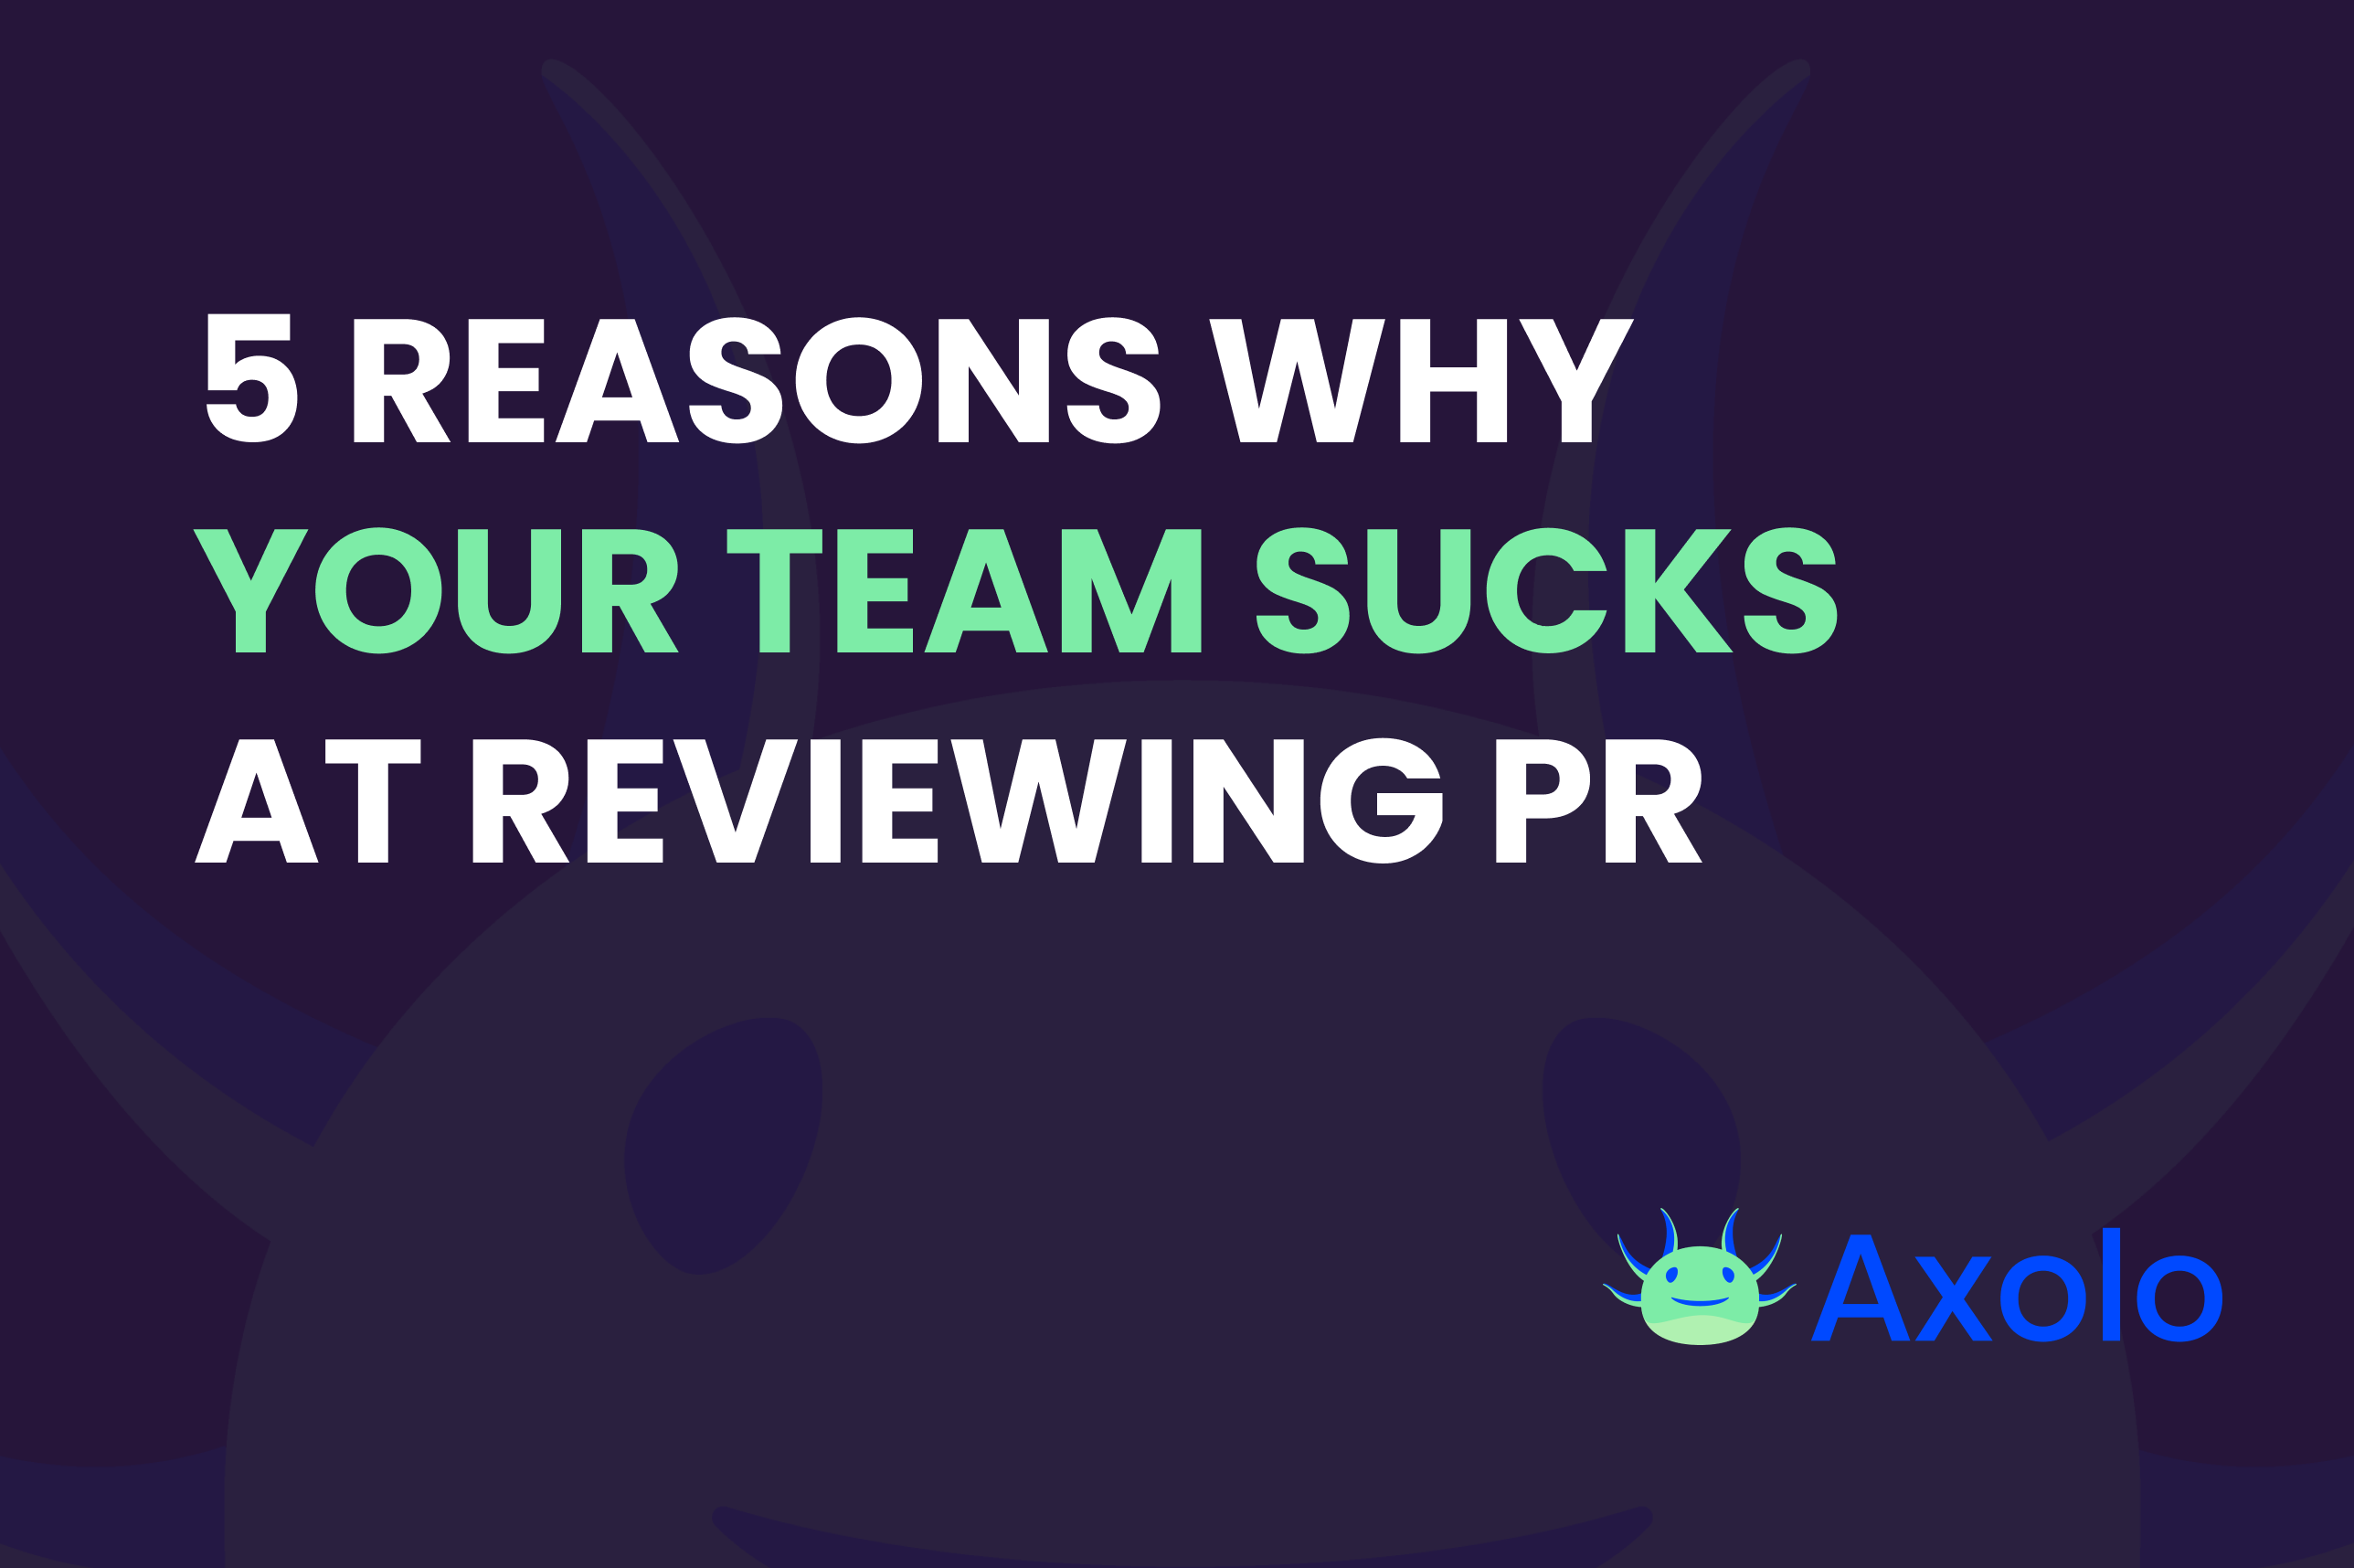 5 reasons why your team sucks at reviewing pull requests